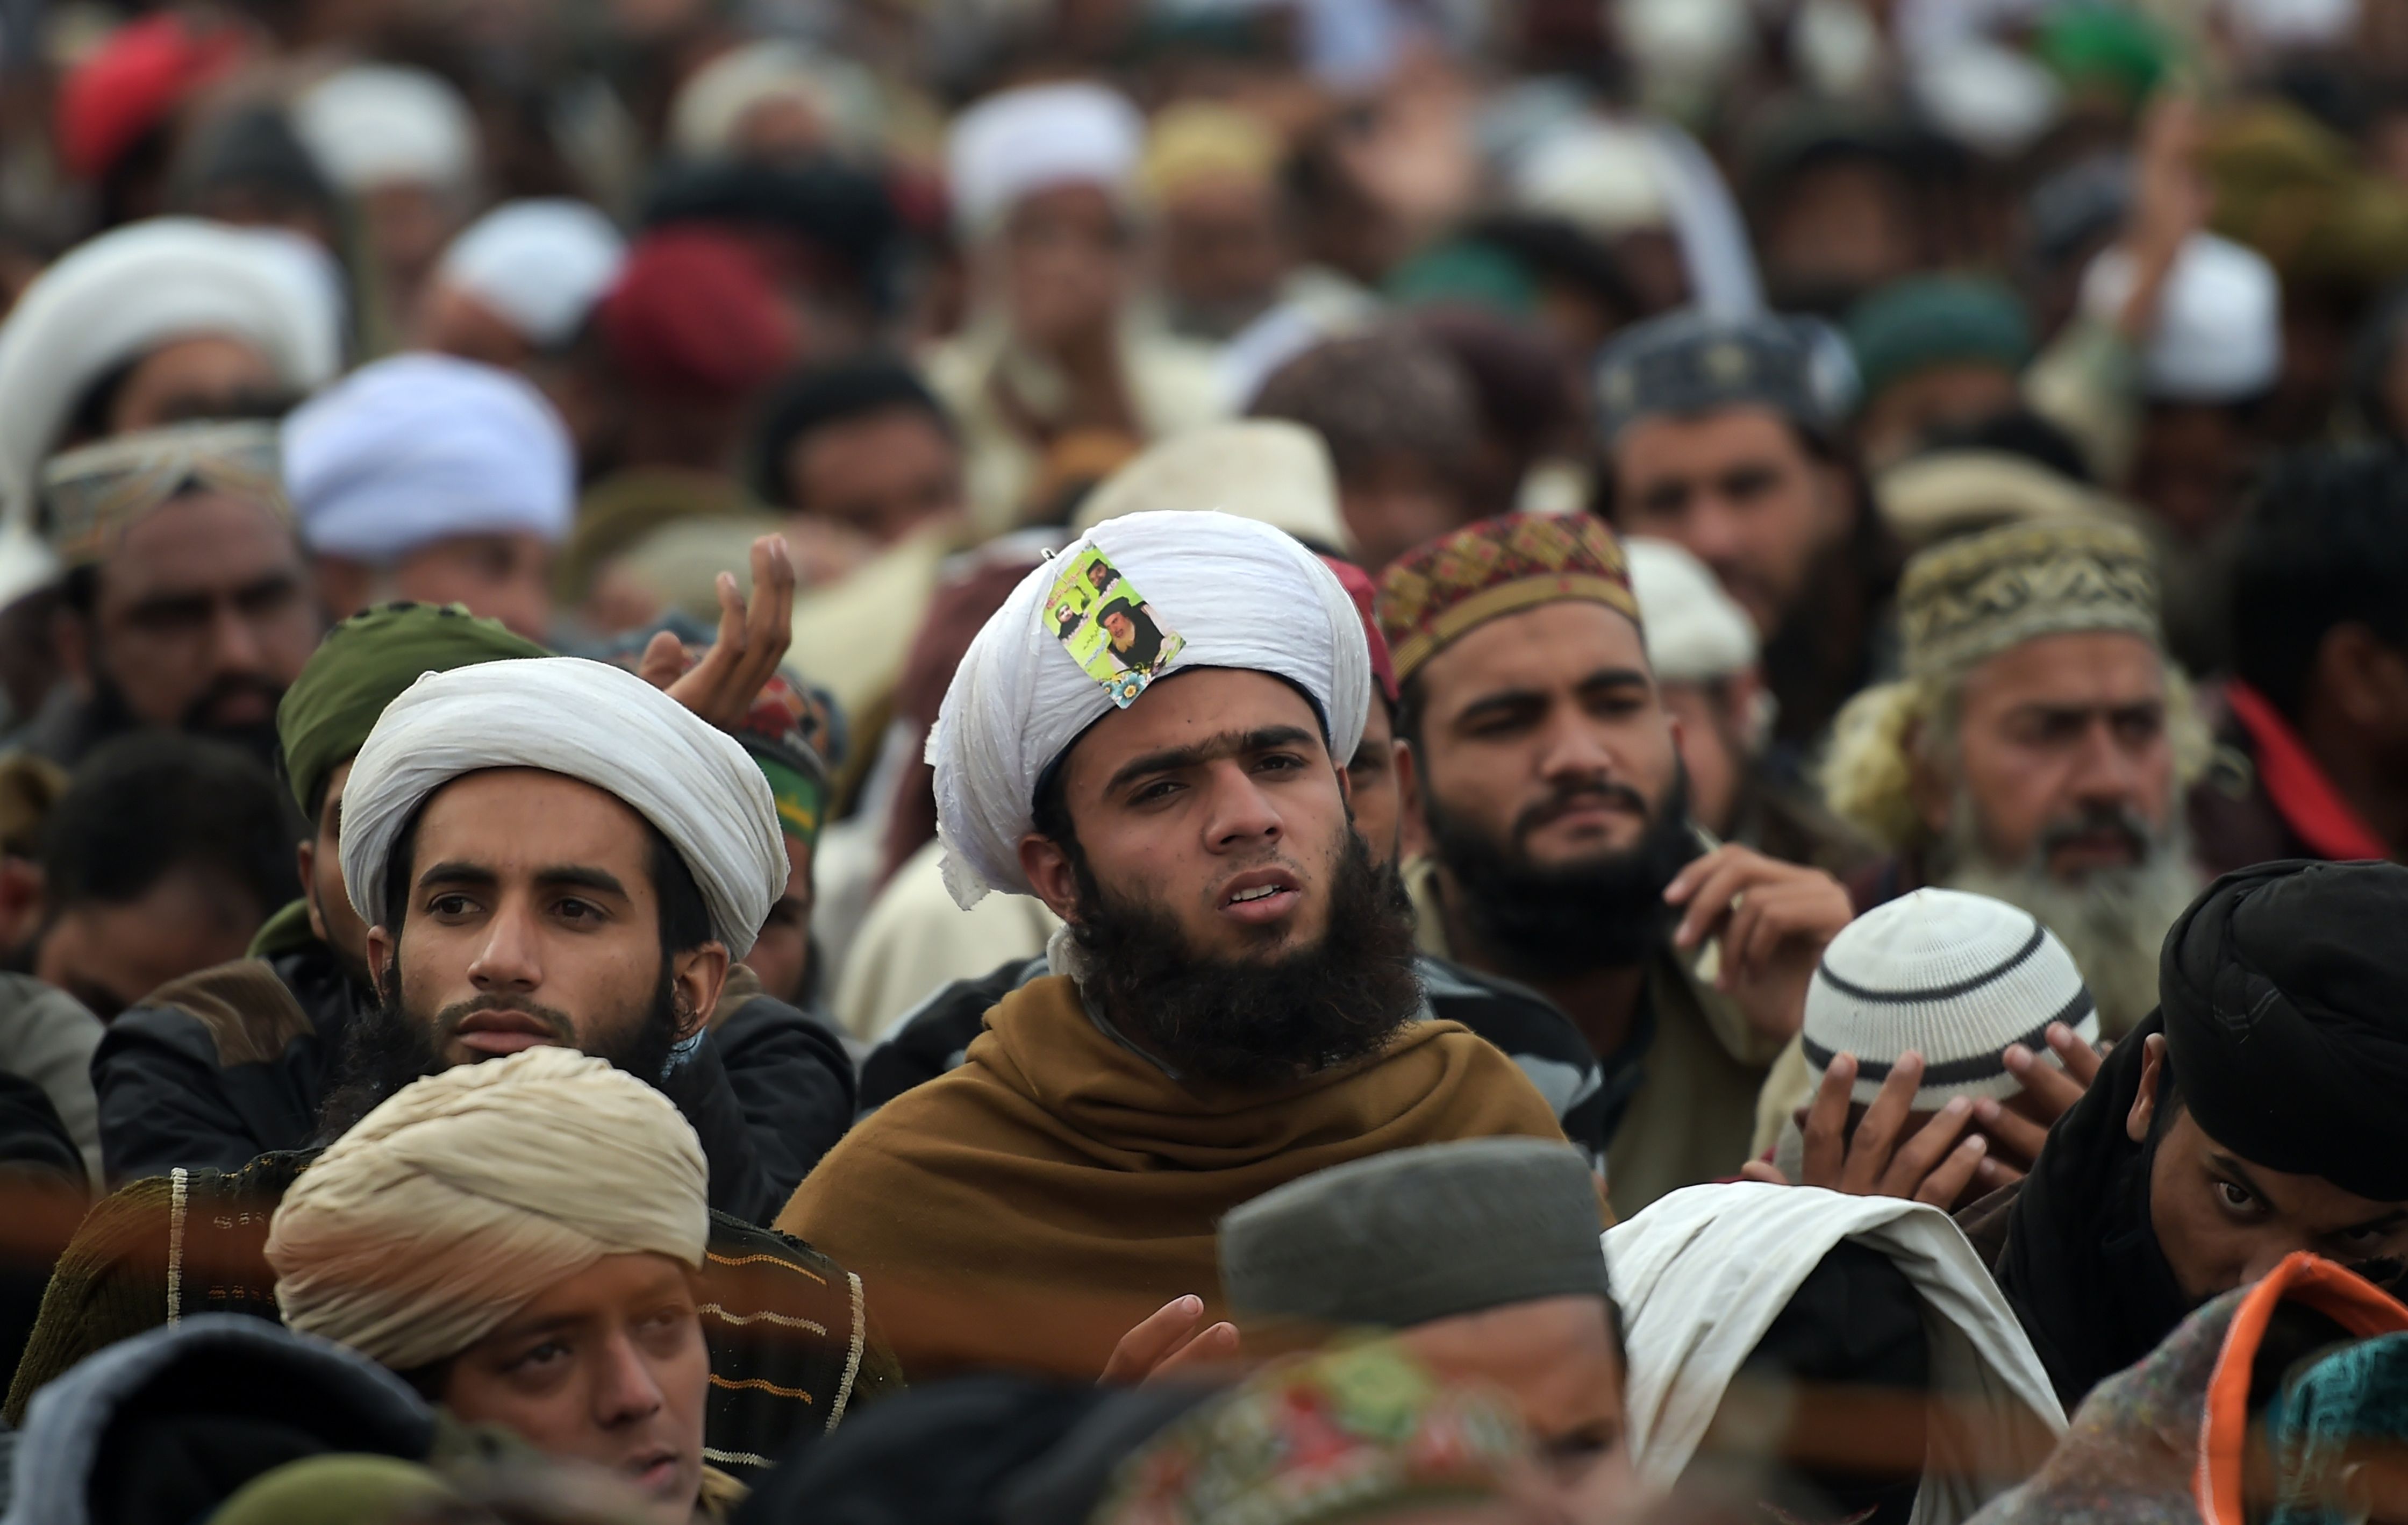 pakistans-emboldened-islamists - Pakistani supporters of the Tehreek-i-Labaik Yah Rasool Allah Pakistan (TLYRAP) religious group listen to their leader Khadim Hussain Rizvi while as he announces the end of sit-in protest on a blocked flyover bridge during a press conference in Islamabad on 27 November, 2017